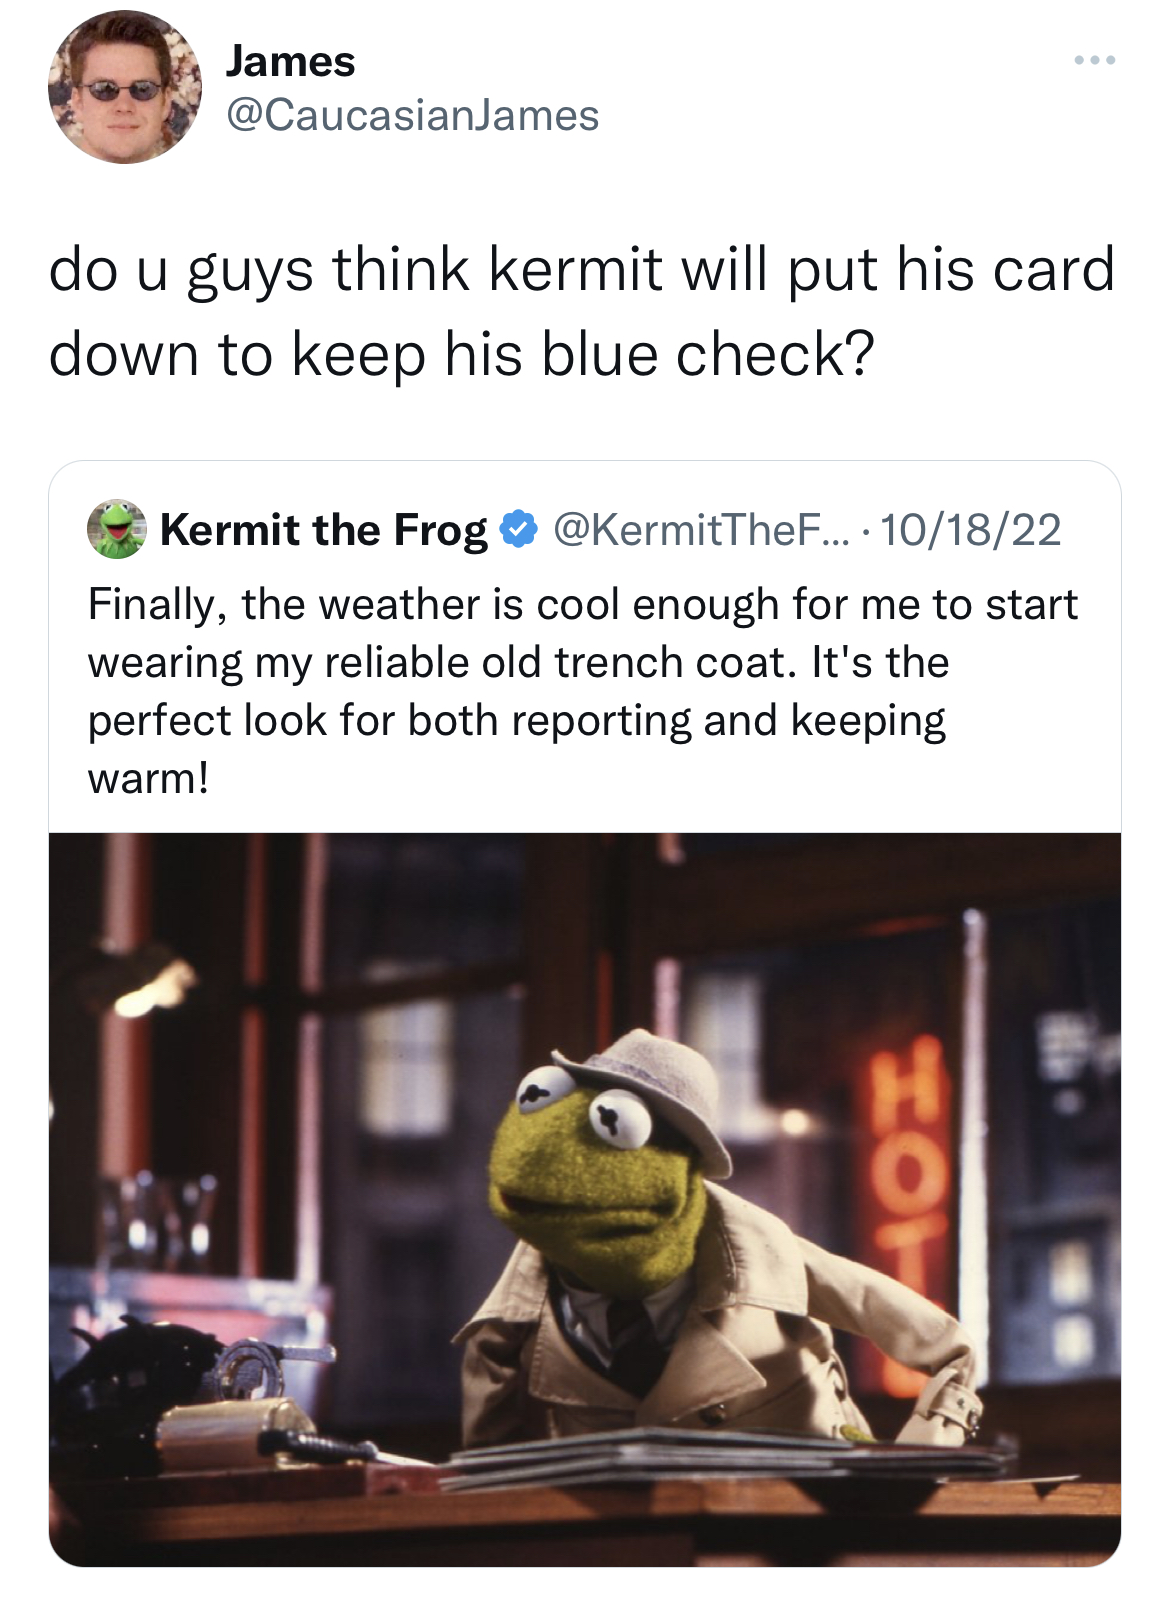 Celebs get roasted on twitter - photo caption - James do u guys think kermit will put his card down to keep his blue check? Kermit the Frog ... 101822 Finally, the weather is cool enough for me to start wearing my reliable old trench coat. It's the perfec